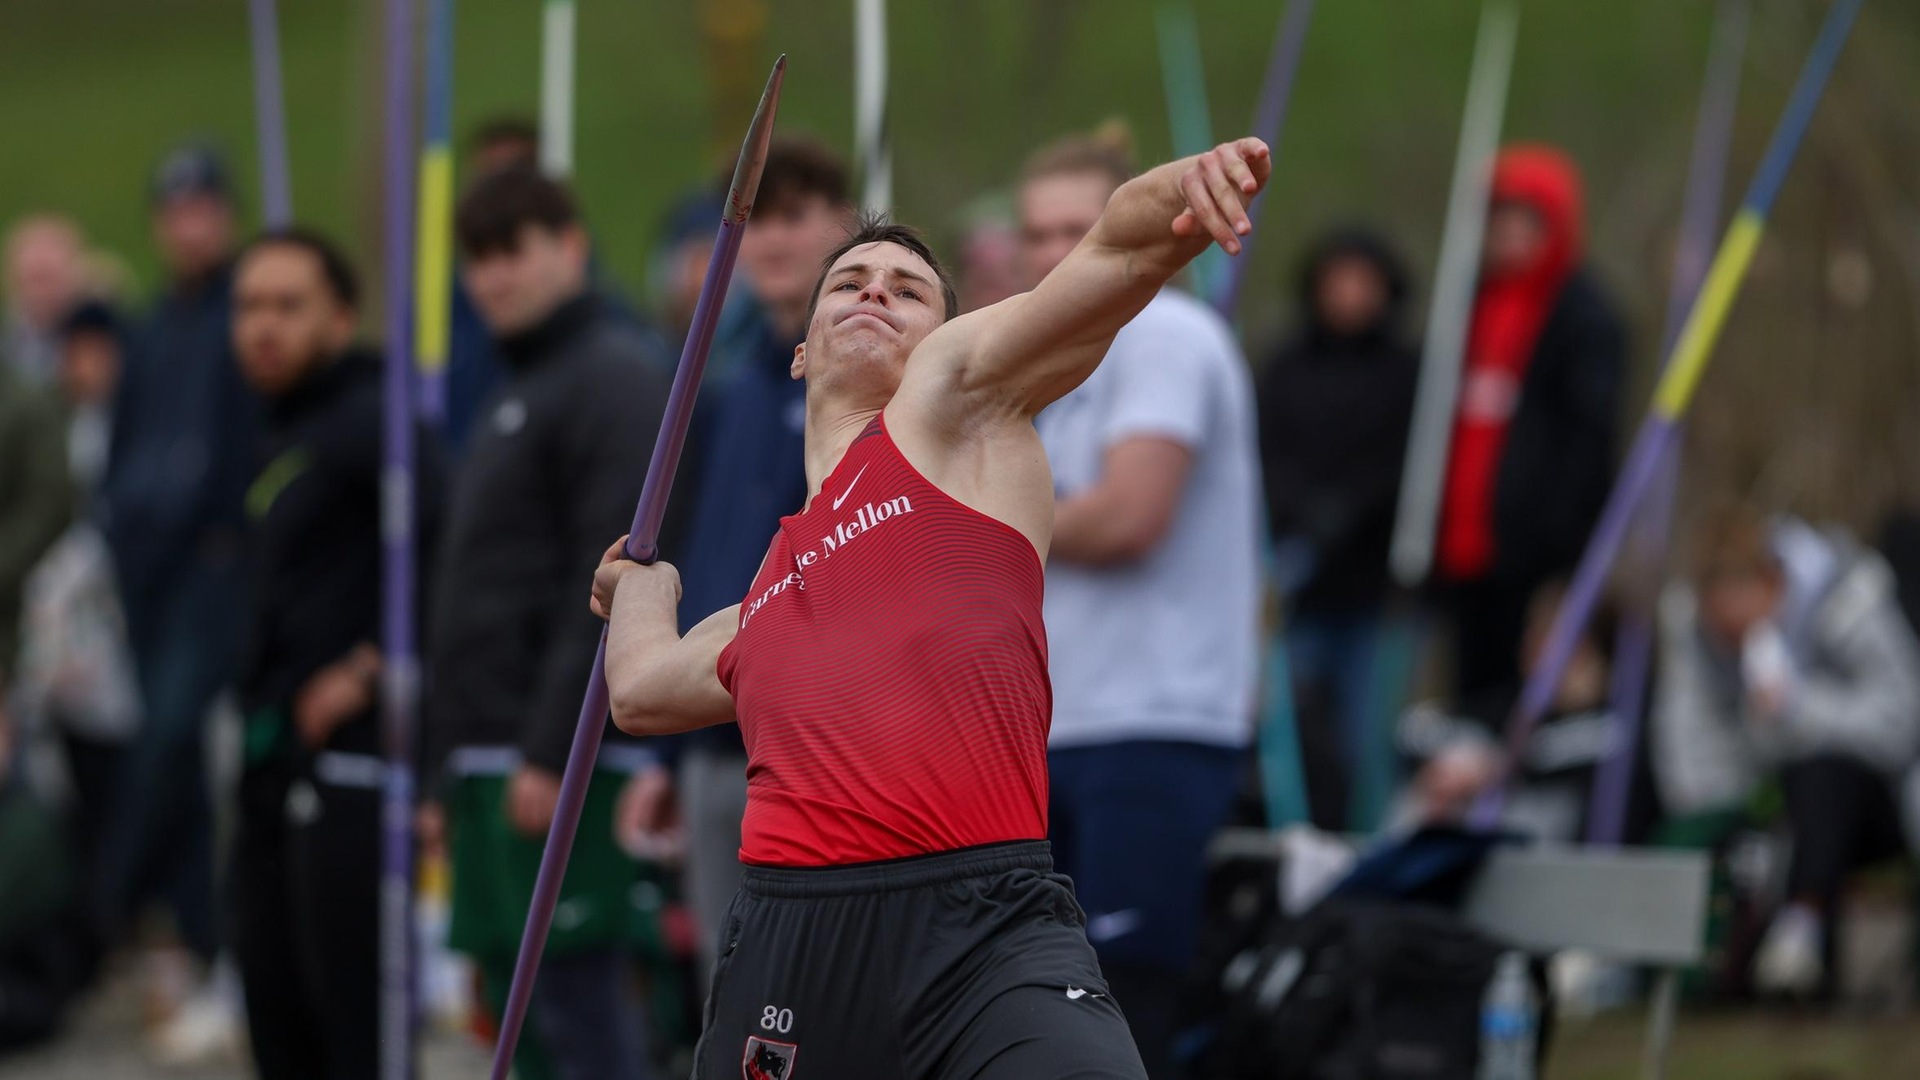 Rich Breaks Decathlon School Record at Susquehanna Multi; Tartans Compete at Westminster and Bucknell